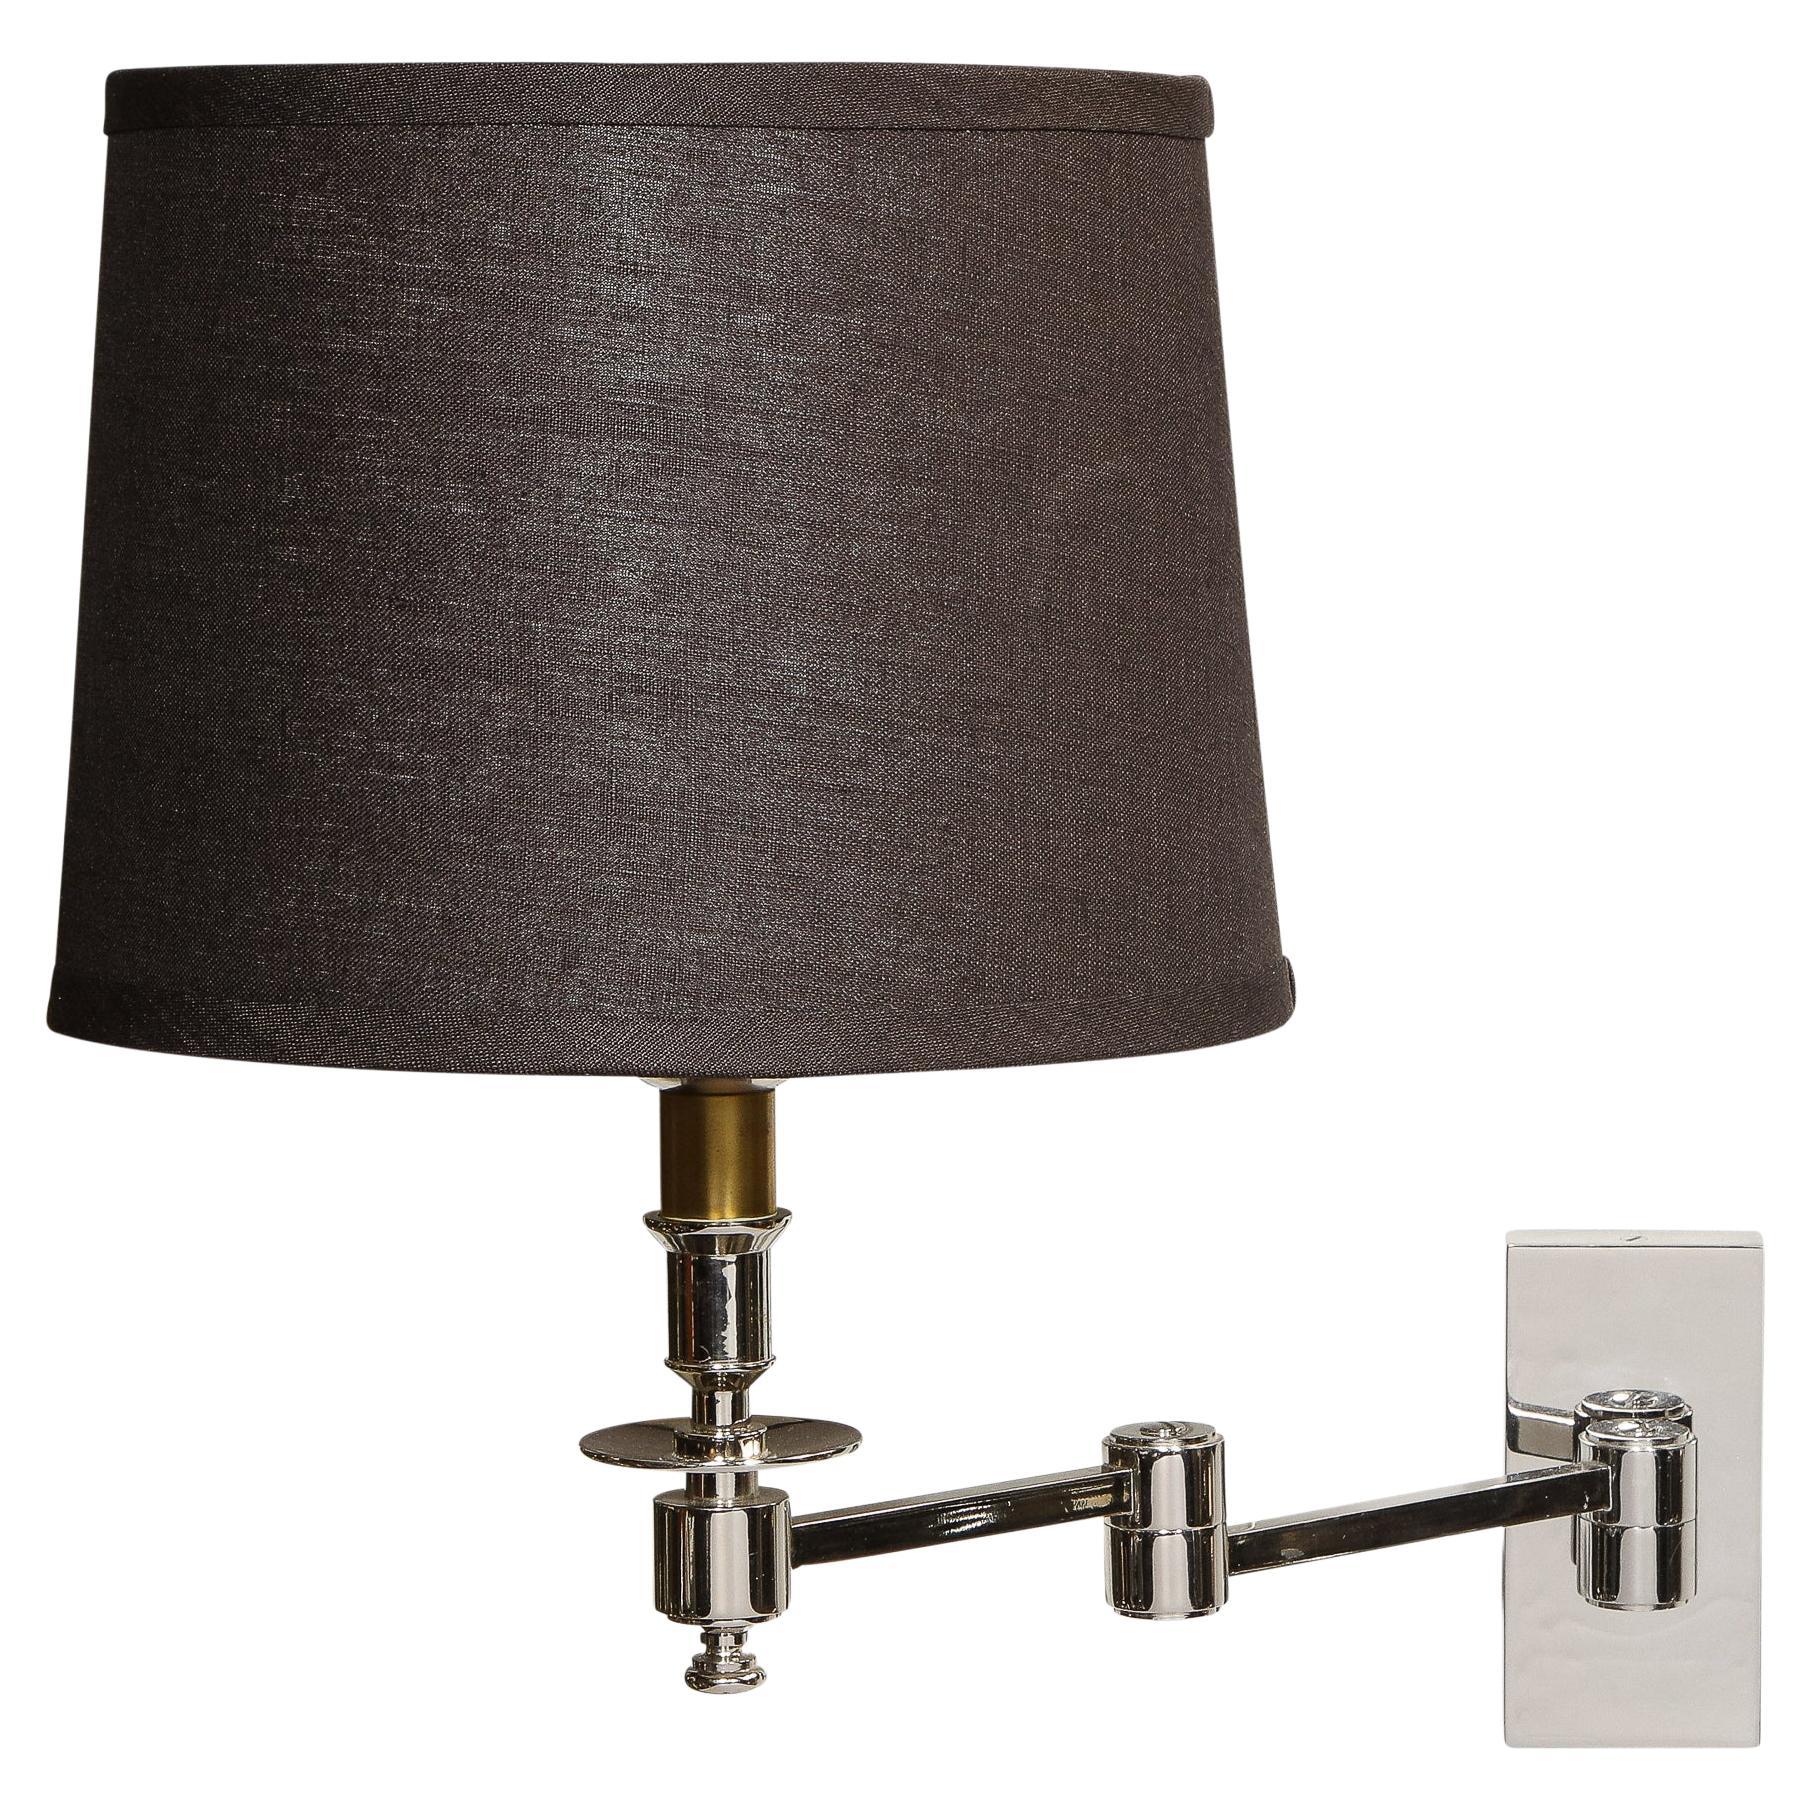 Mid-Century Modern Extendable Cantlivering Polished Nickel Wall Sconce